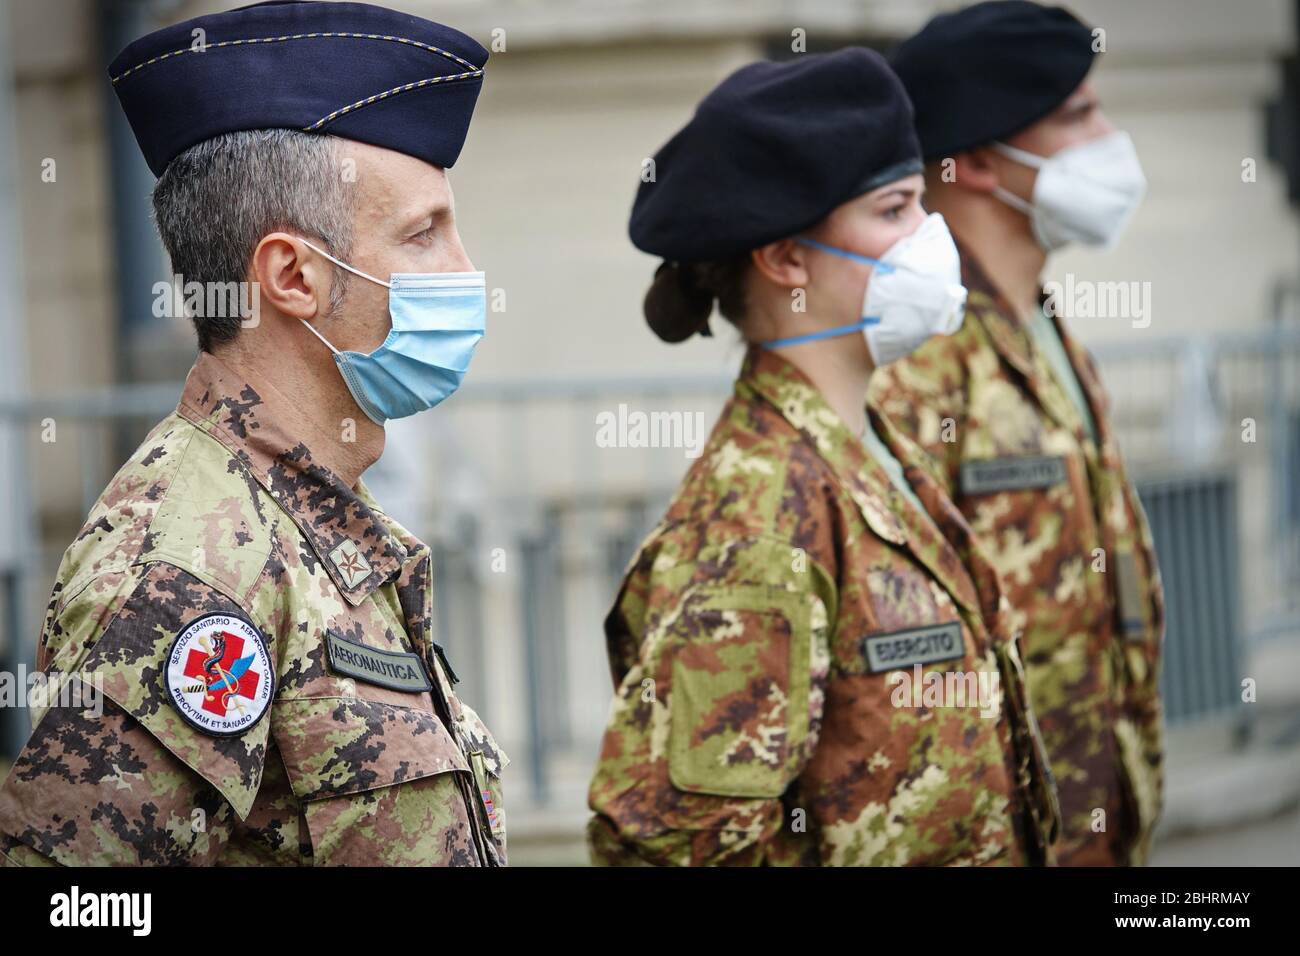 New military nurses to be employed in nursing homes to help the regional health system cope with the coronavirus emergency. Turin, Italy - April 2020 Stock Photo